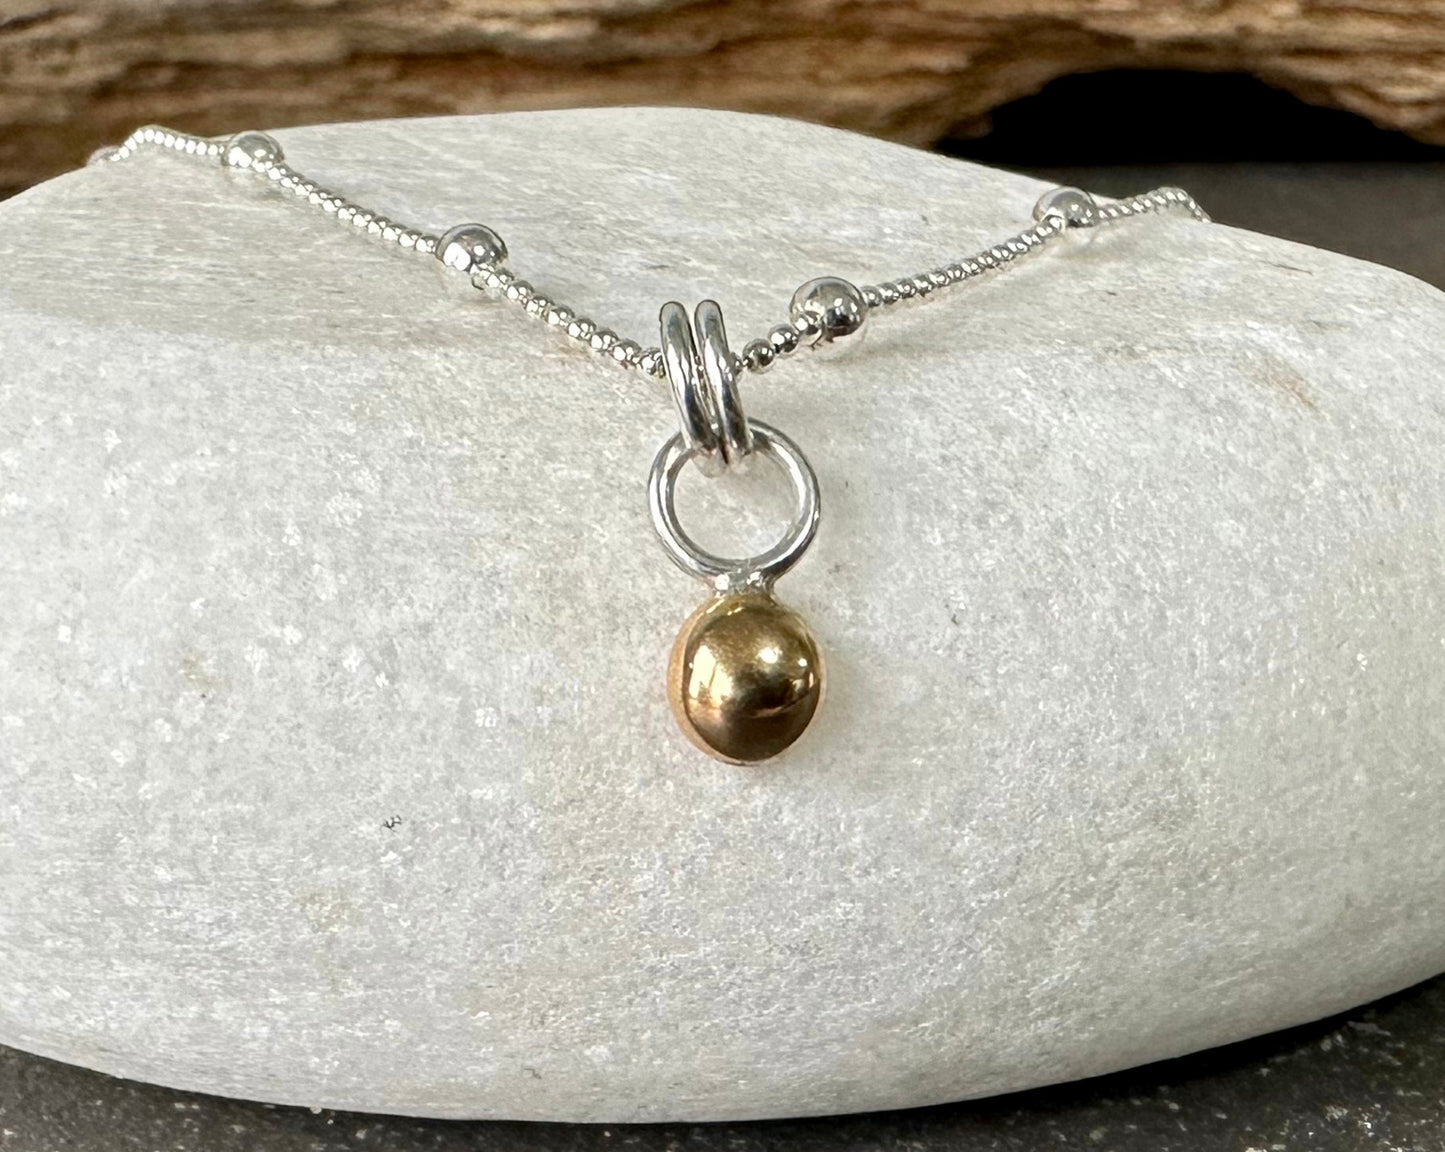 9ct Gold Nugget Pendant, Freeform Gold and Sterling Silver Necklace, Handmade Gold Ball Pendant, Solid Gold Blob, Bridesmaid Gift